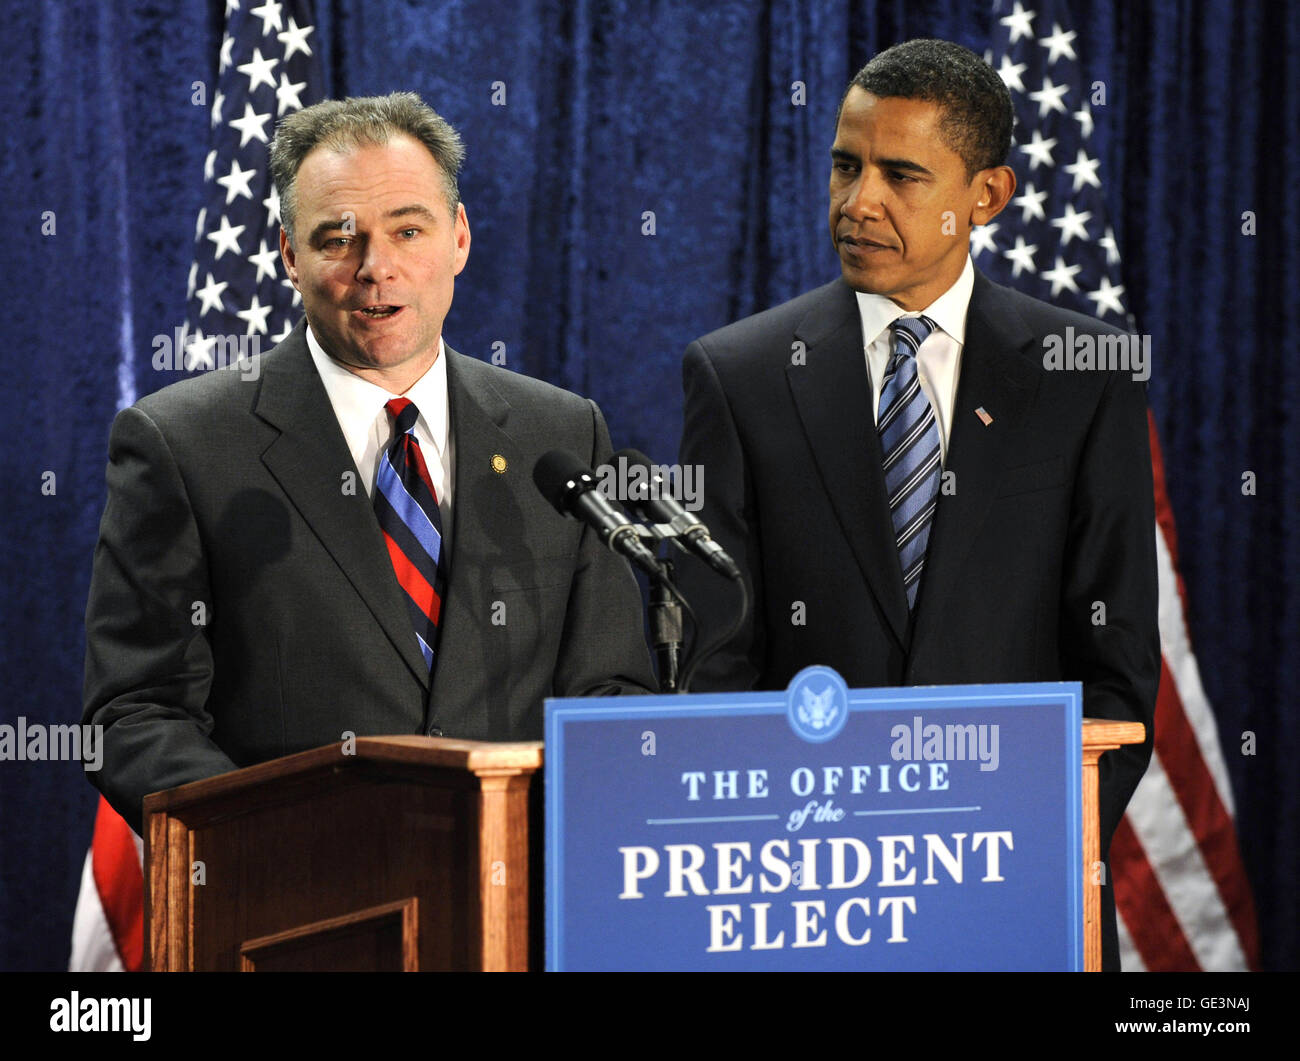 Washington, District of Columbia, USA. 8th Jan, 2009. Washington, DC - January 8, 2009 -- Virginia Governor Tim Kaine (L) speaks alongside United States President-elect Barack Obama after Kaine was introduced as the new Chairman of the Democratic National Comittee in Washington on Thursday, January 8, 2009. Credit: Kevin Dietsch - Pool via CNP © Kevin Dietsch/CNP/ZUMA Wire/Alamy Live News Stock Photo